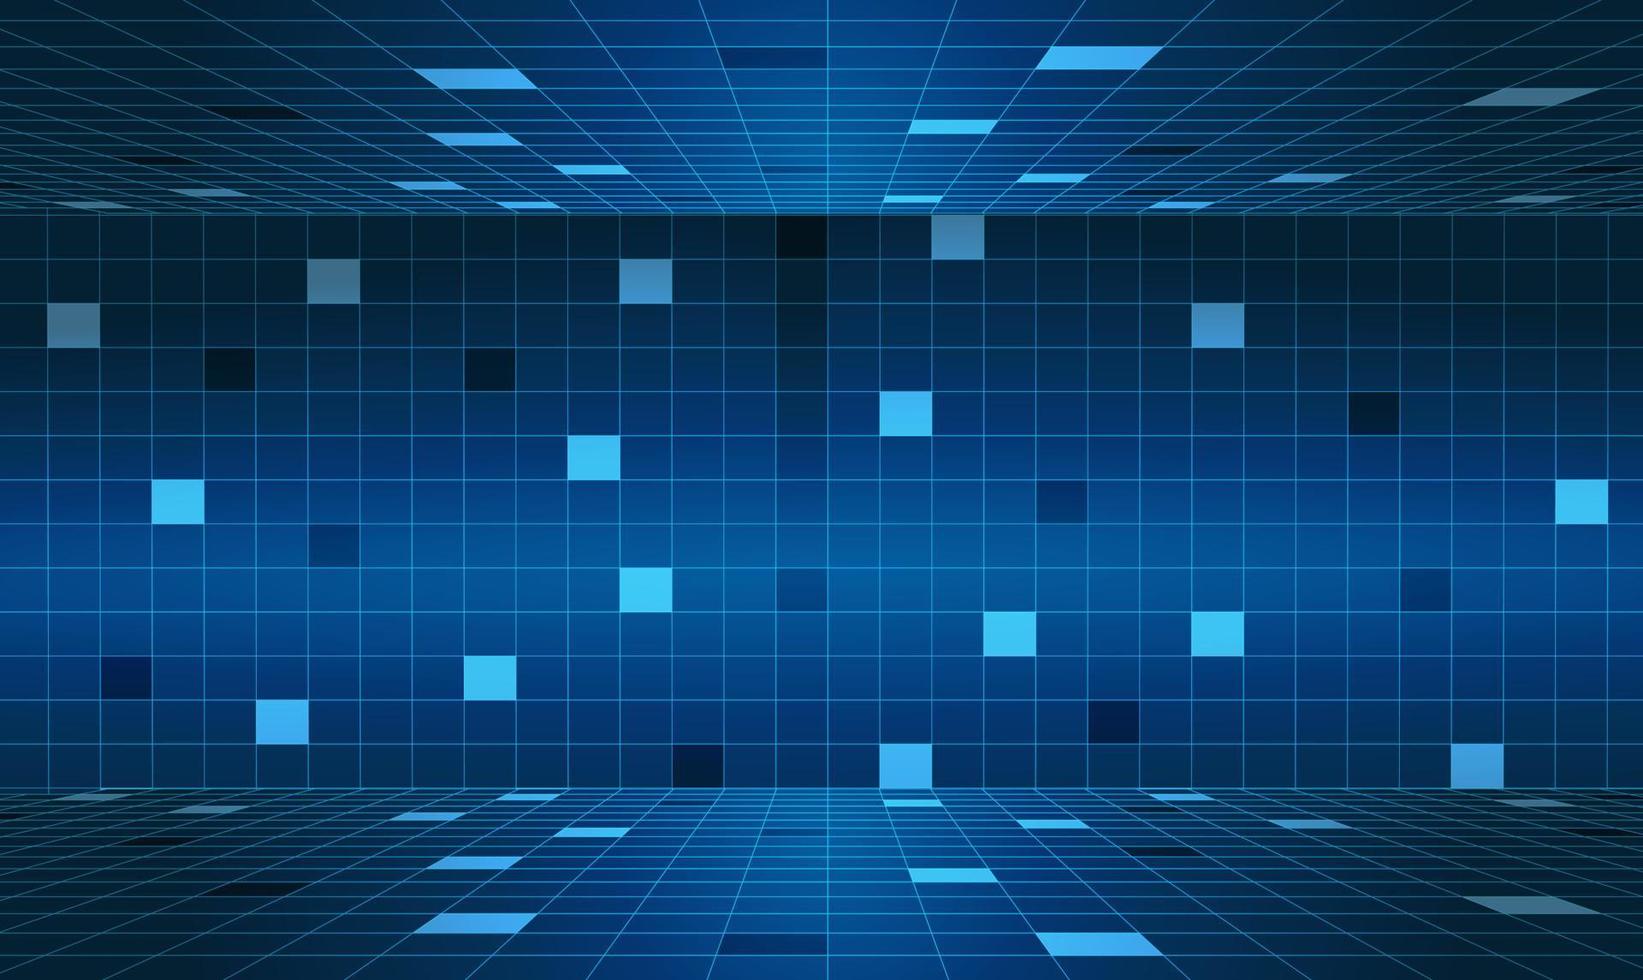 Abstract high technology blue geometric pattern background.Vector illustration vector